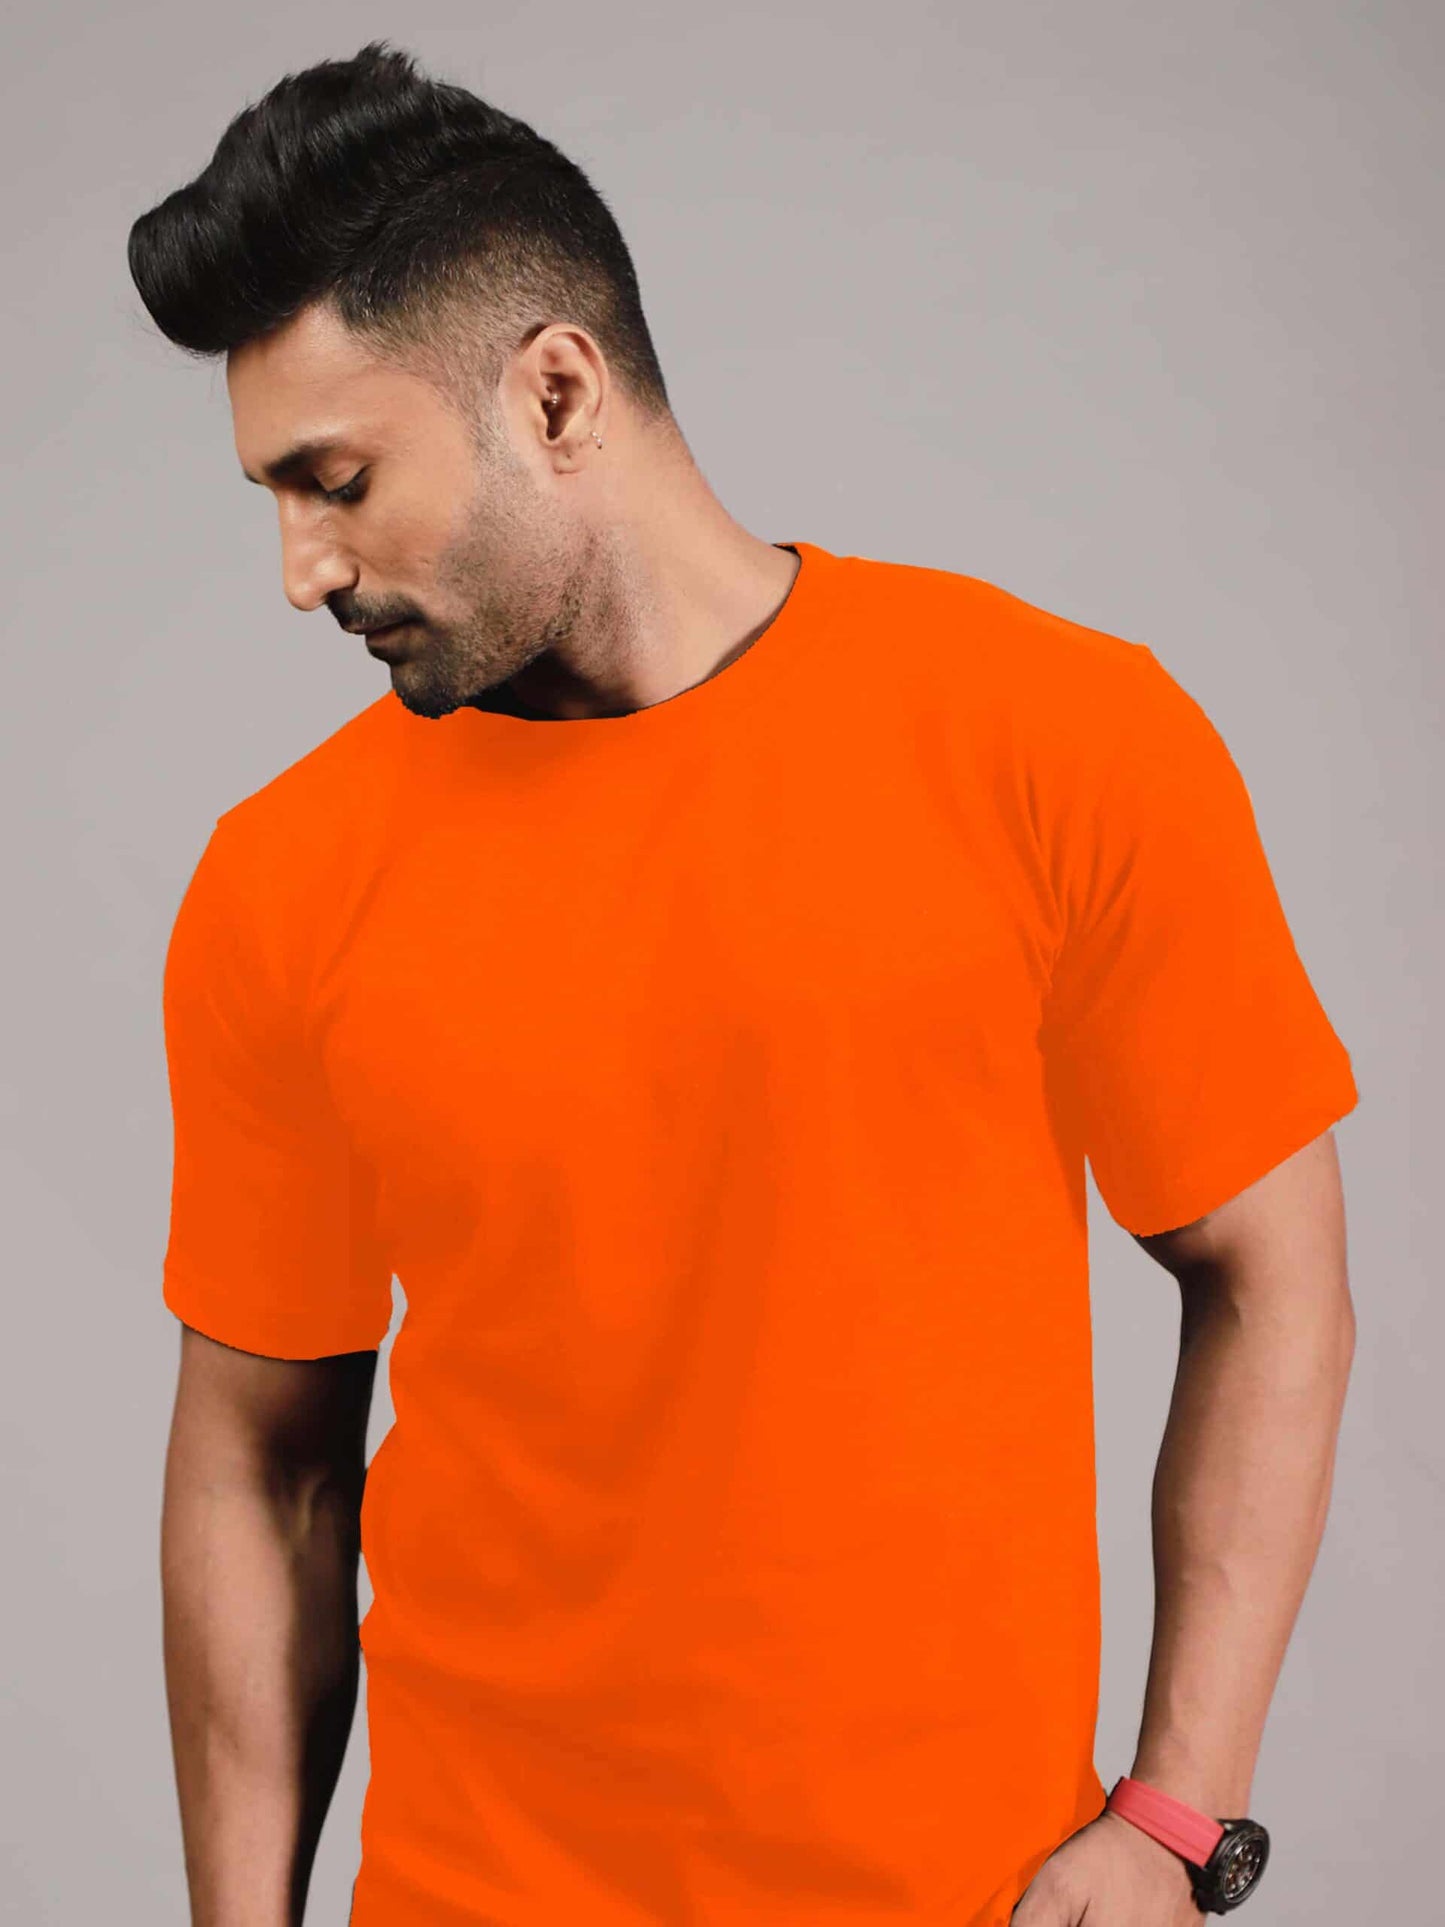 Style Wear Safety Color T-shirts-Adult